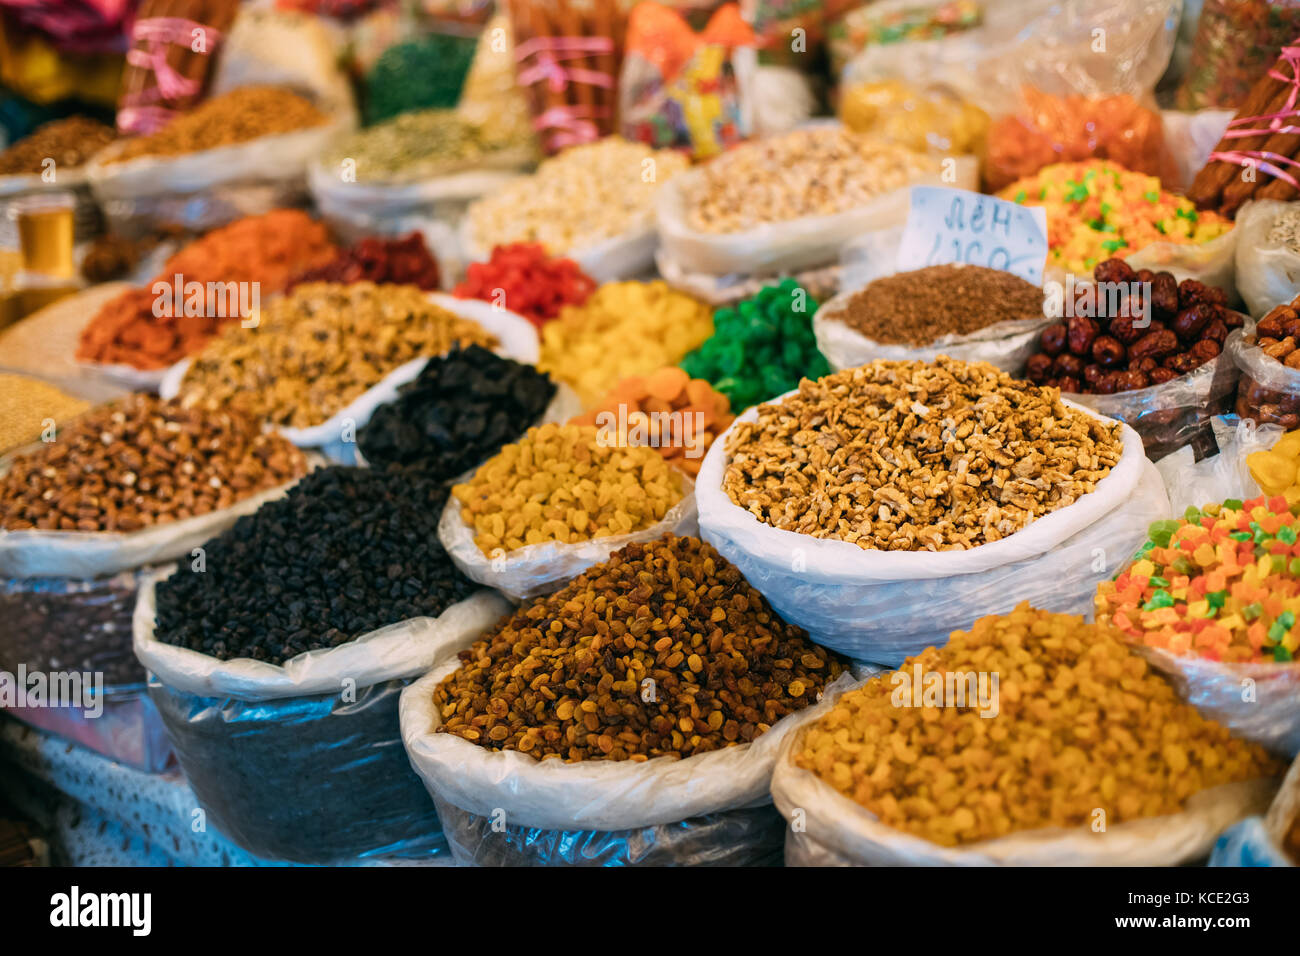 Tbilisi, Georgia. View Of Persian English Common Walnut (Juglans Regia), Succade And Dried Fruits In Bags On Showcase Of Local Food Market. Stock Photo